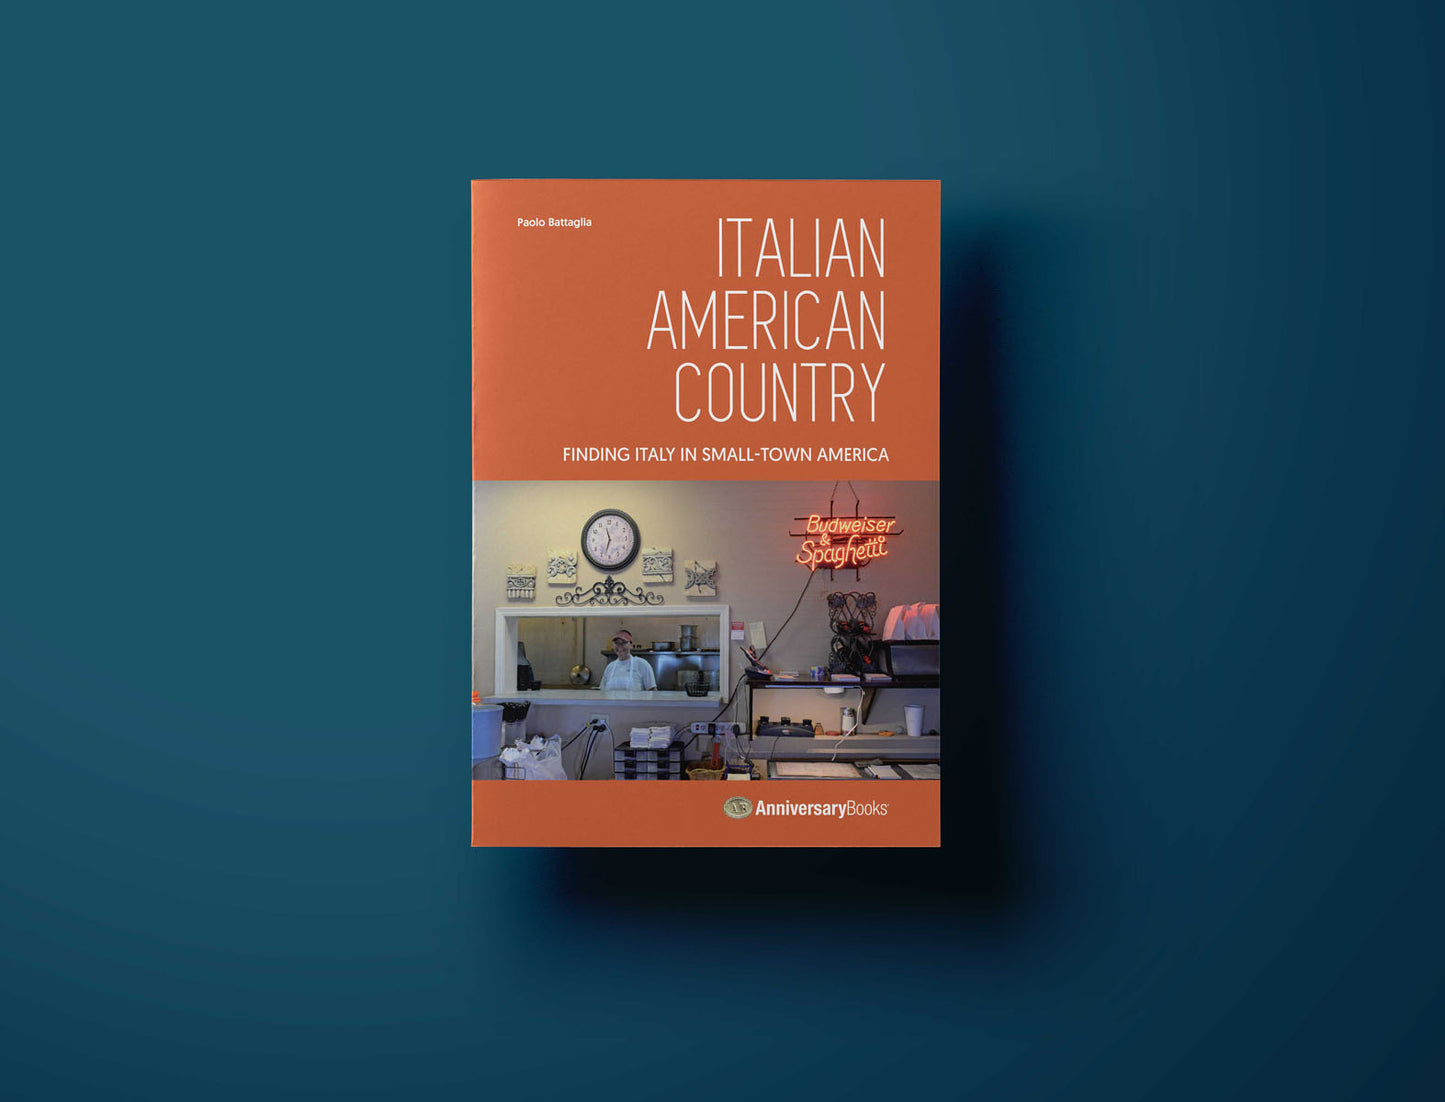 Italian American Country - Finding Italy in small-town America